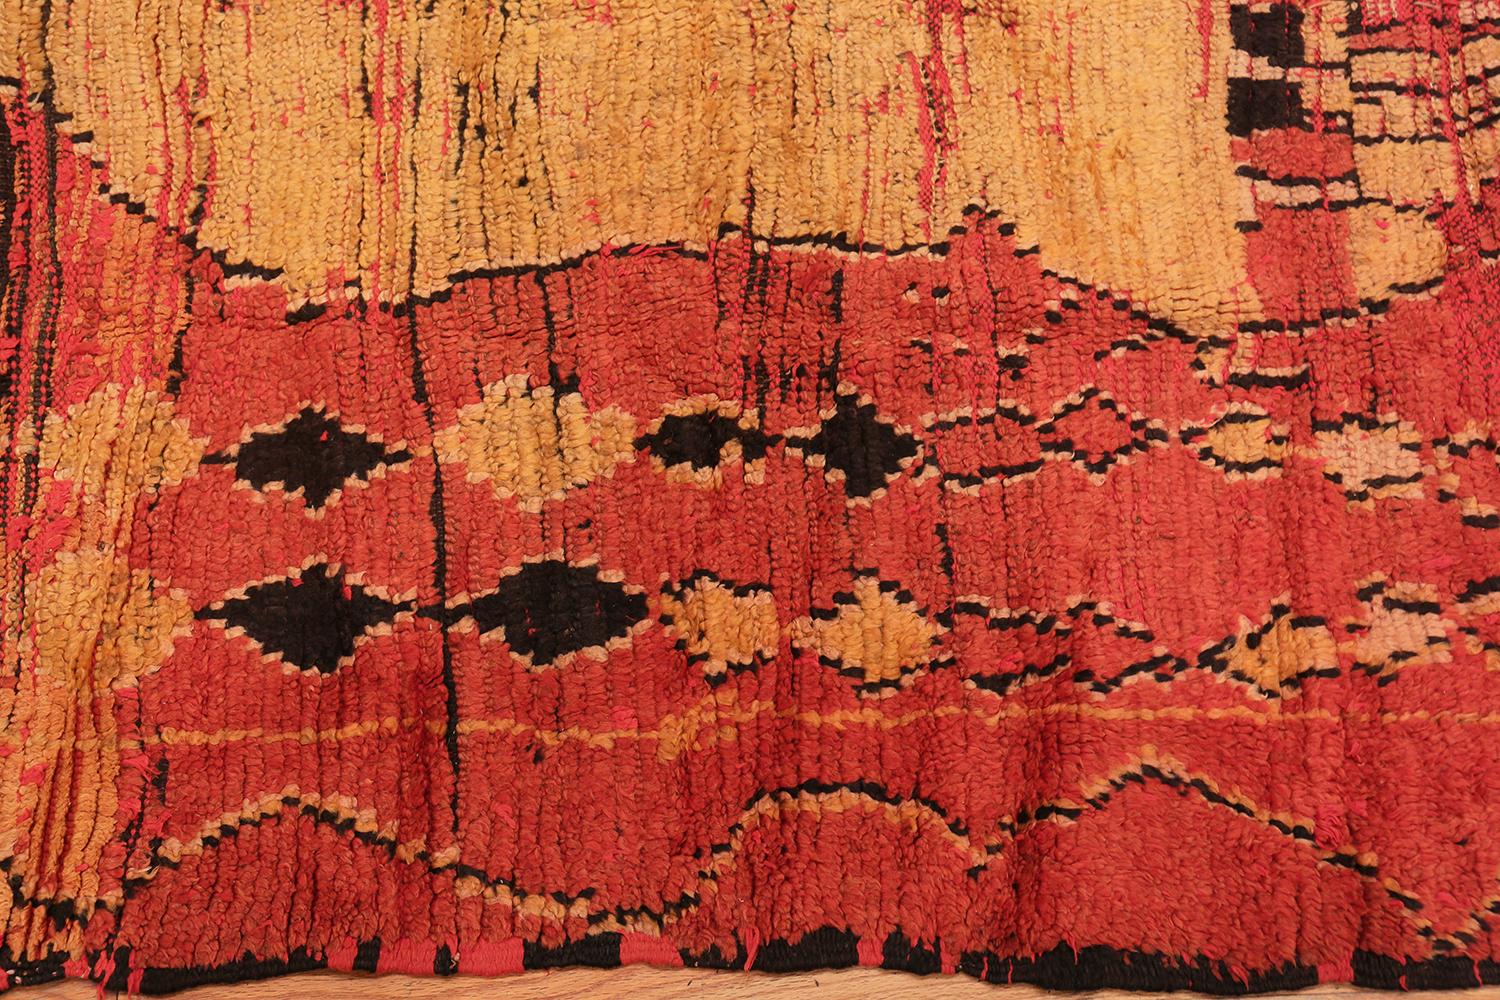 Stunning Primitive vintage Moroccan rug, country of origin: Morocco, circa mid-20th century - Size: 5 ft 7 in x 10 ft 10 in (1.7 m x 3.3 m).